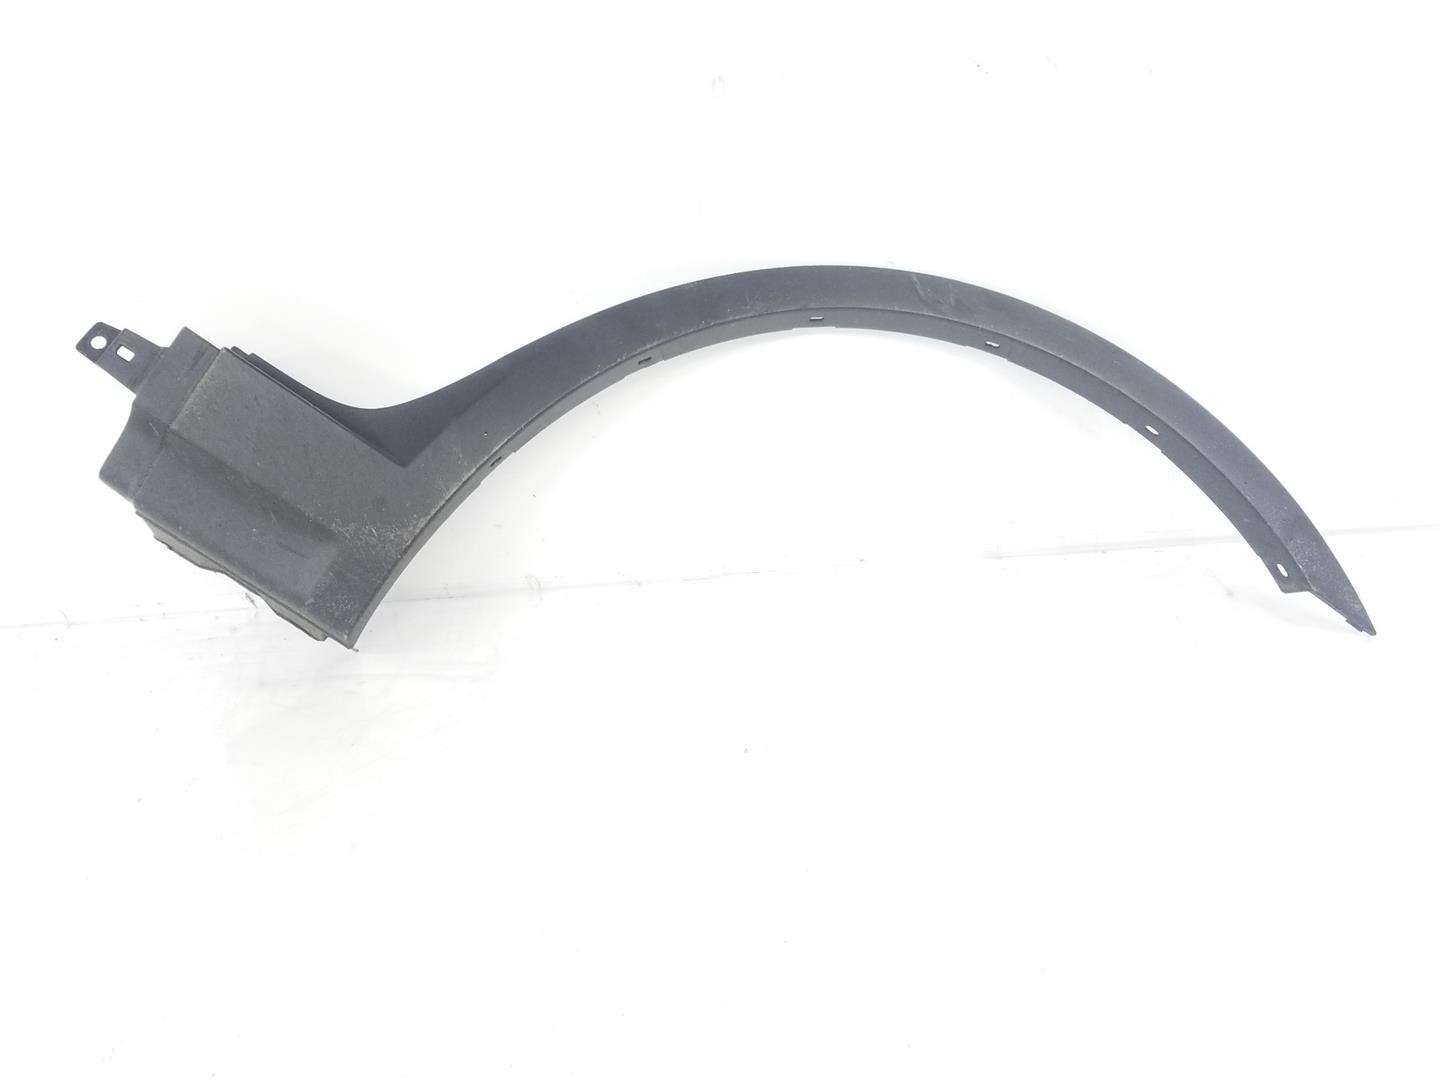 BMW X3 E83 (2003-2010) Front Right Fender Molding 51713405818, 51713405818 19773183